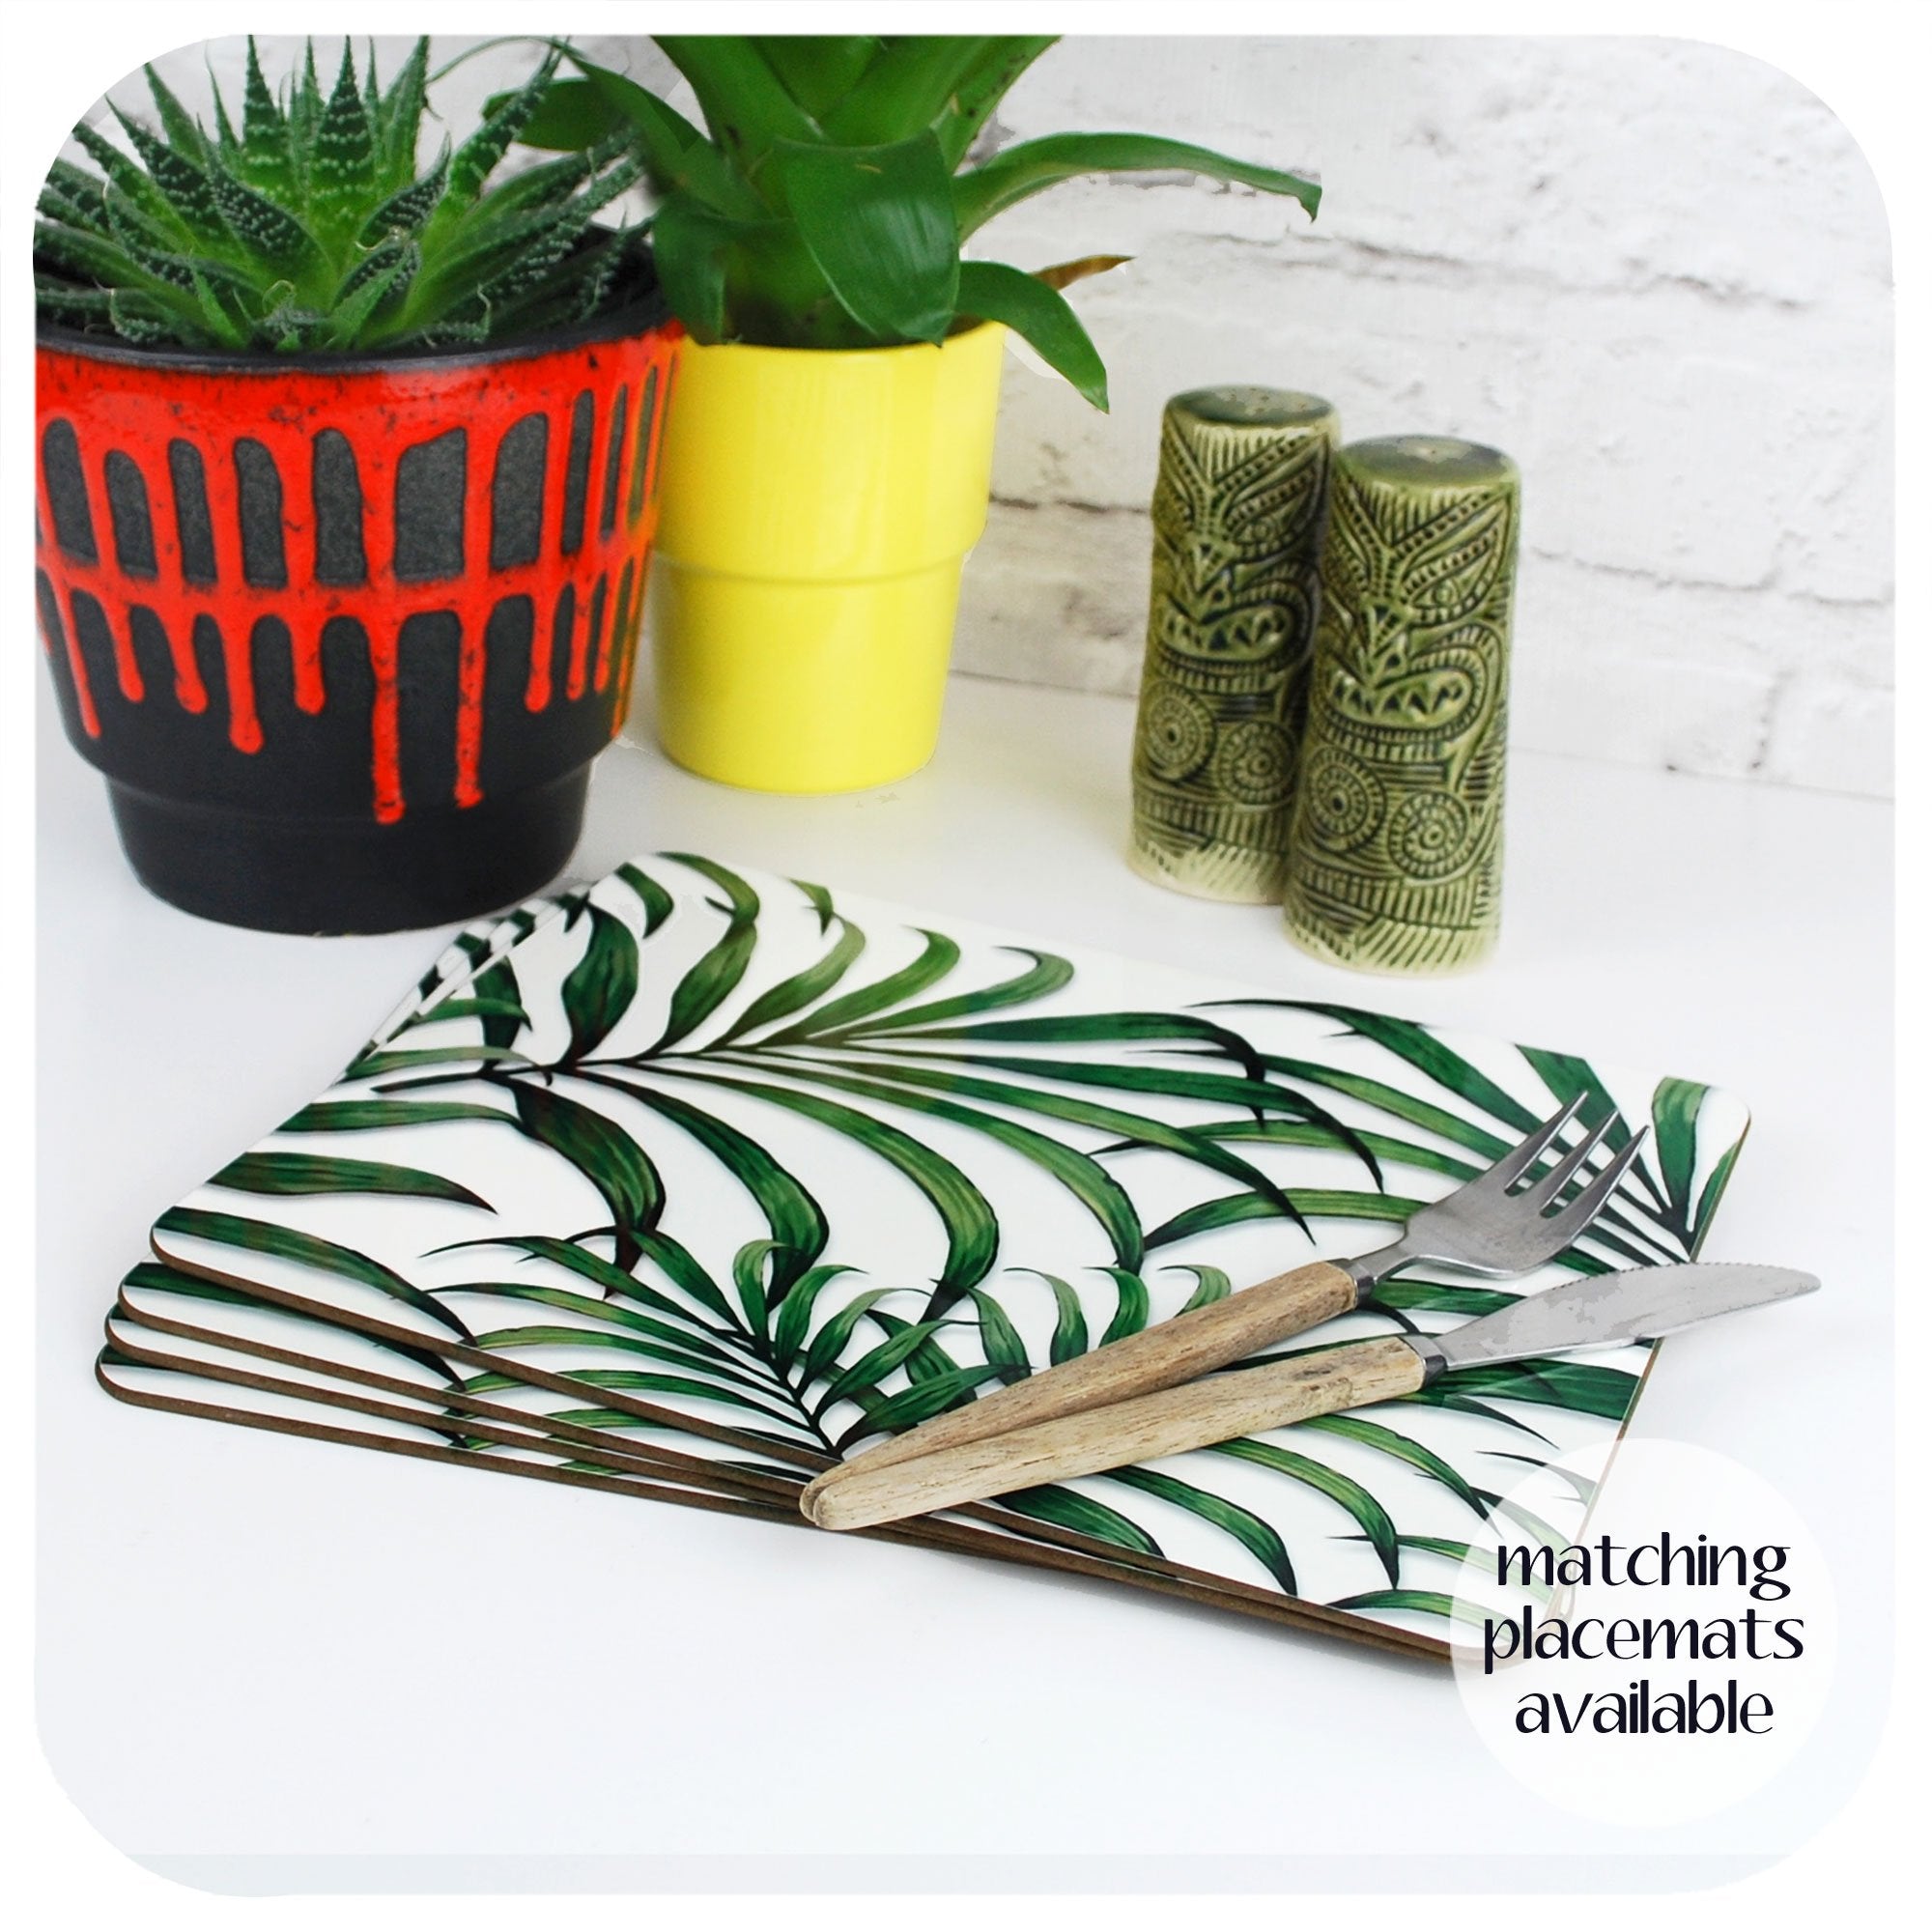 Palm Leaf Placemats, set of 4 on a table with tropical plants and tiki cruet set | The Inkabilly Emporium